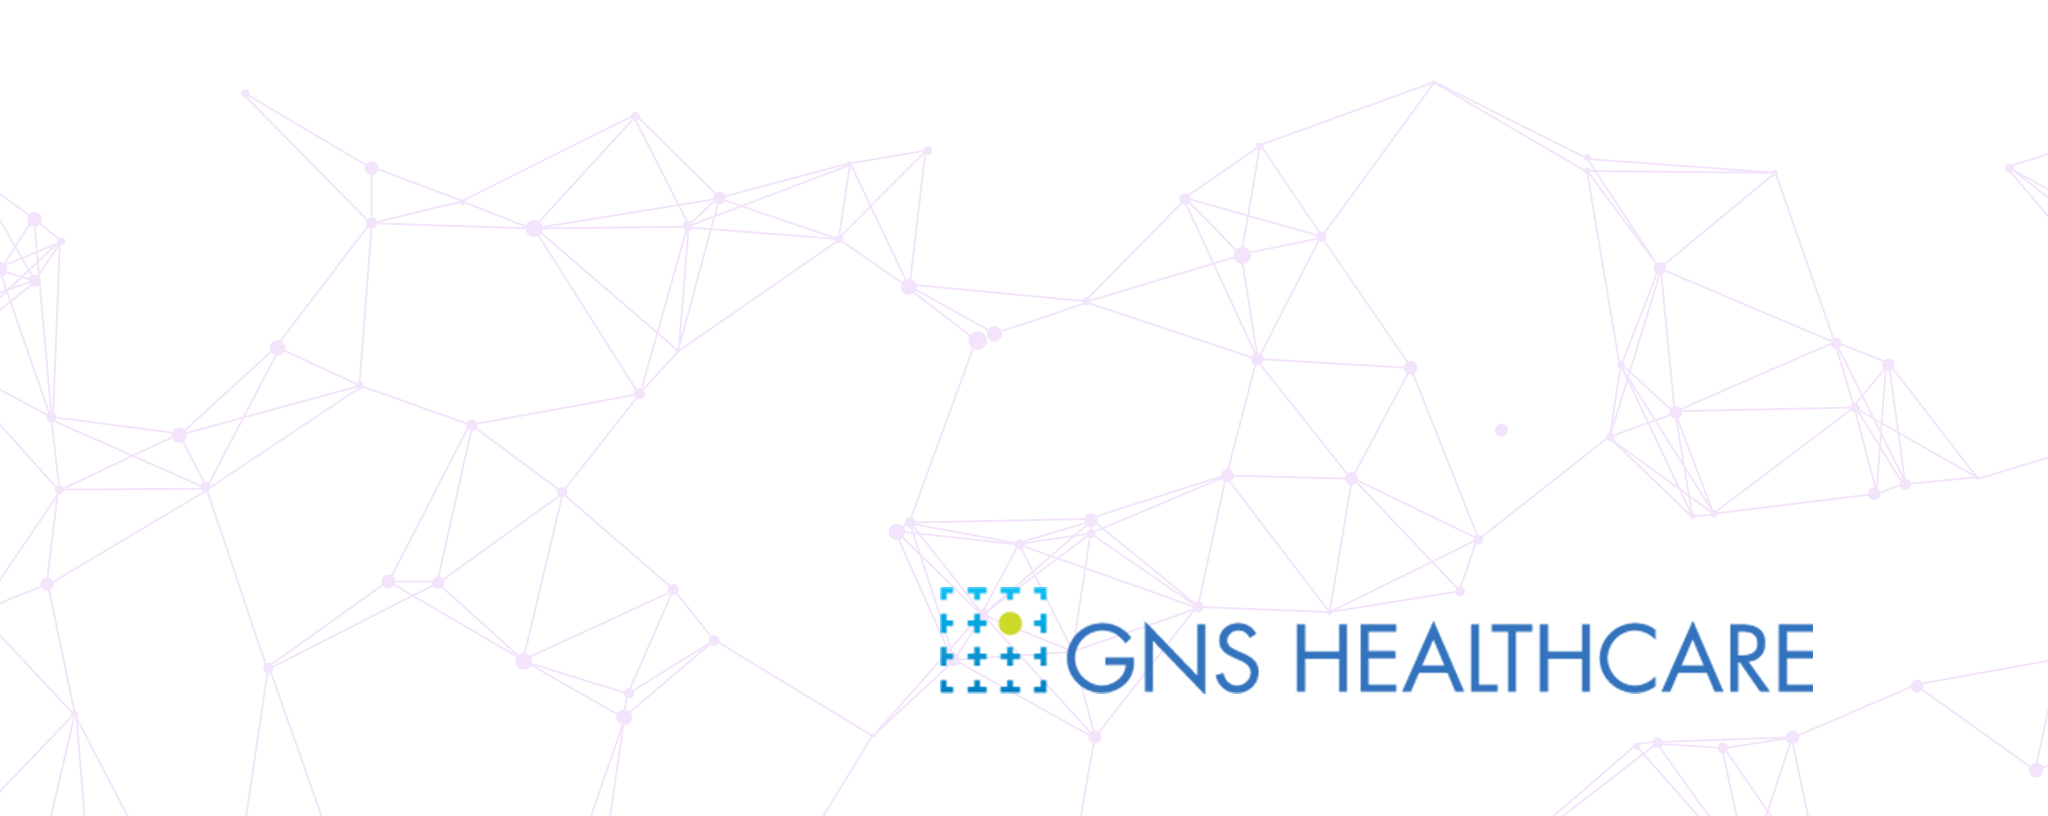 GNS Healthcare and Scipher Medicine® Collaborate to Develop World’s First in silico Patient for Rheumatoid Arthritis